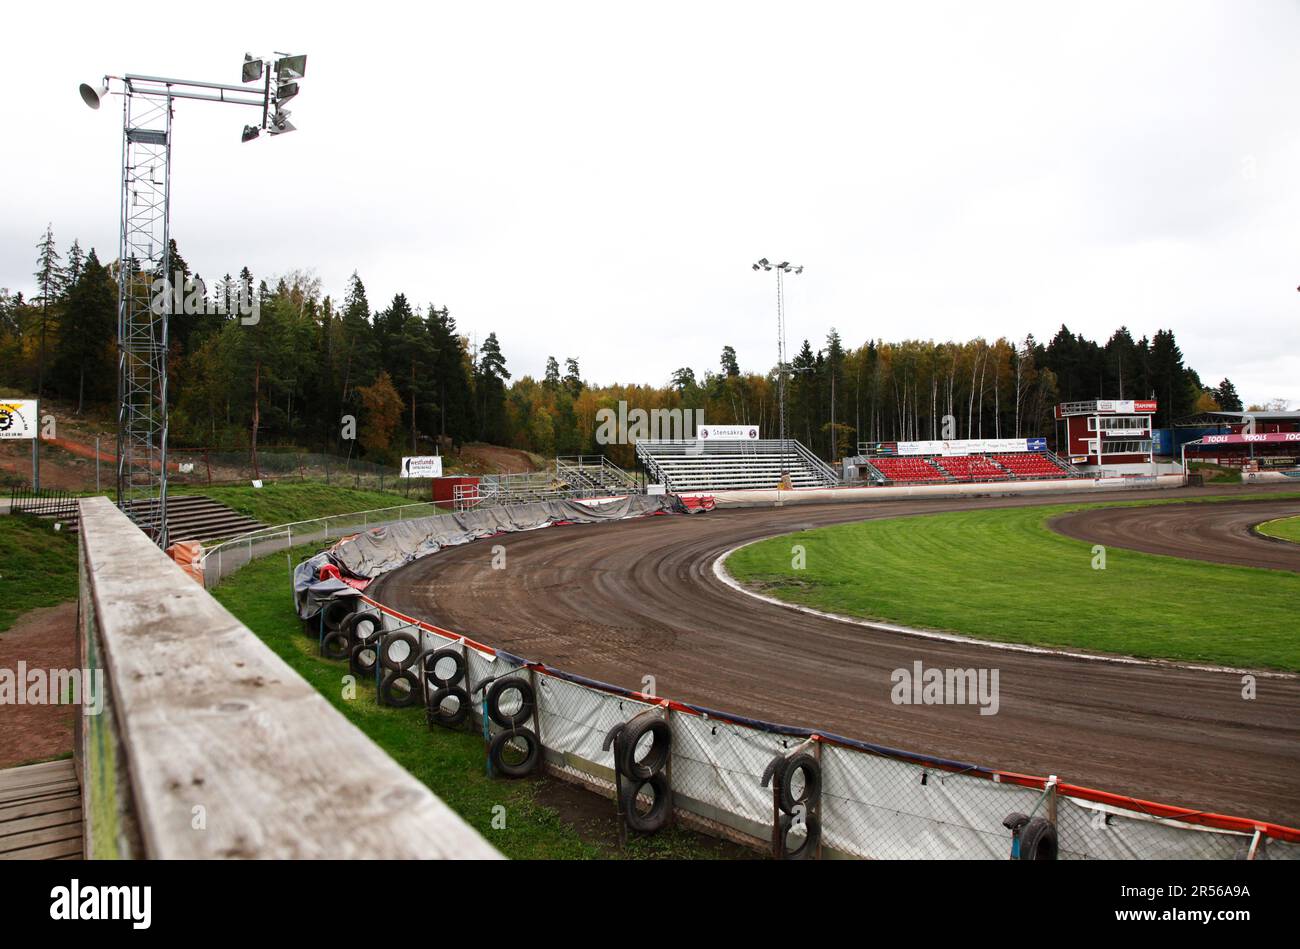 The speedway arena for the speedway team Piraterna, Motala, Sweden. Stock Photo